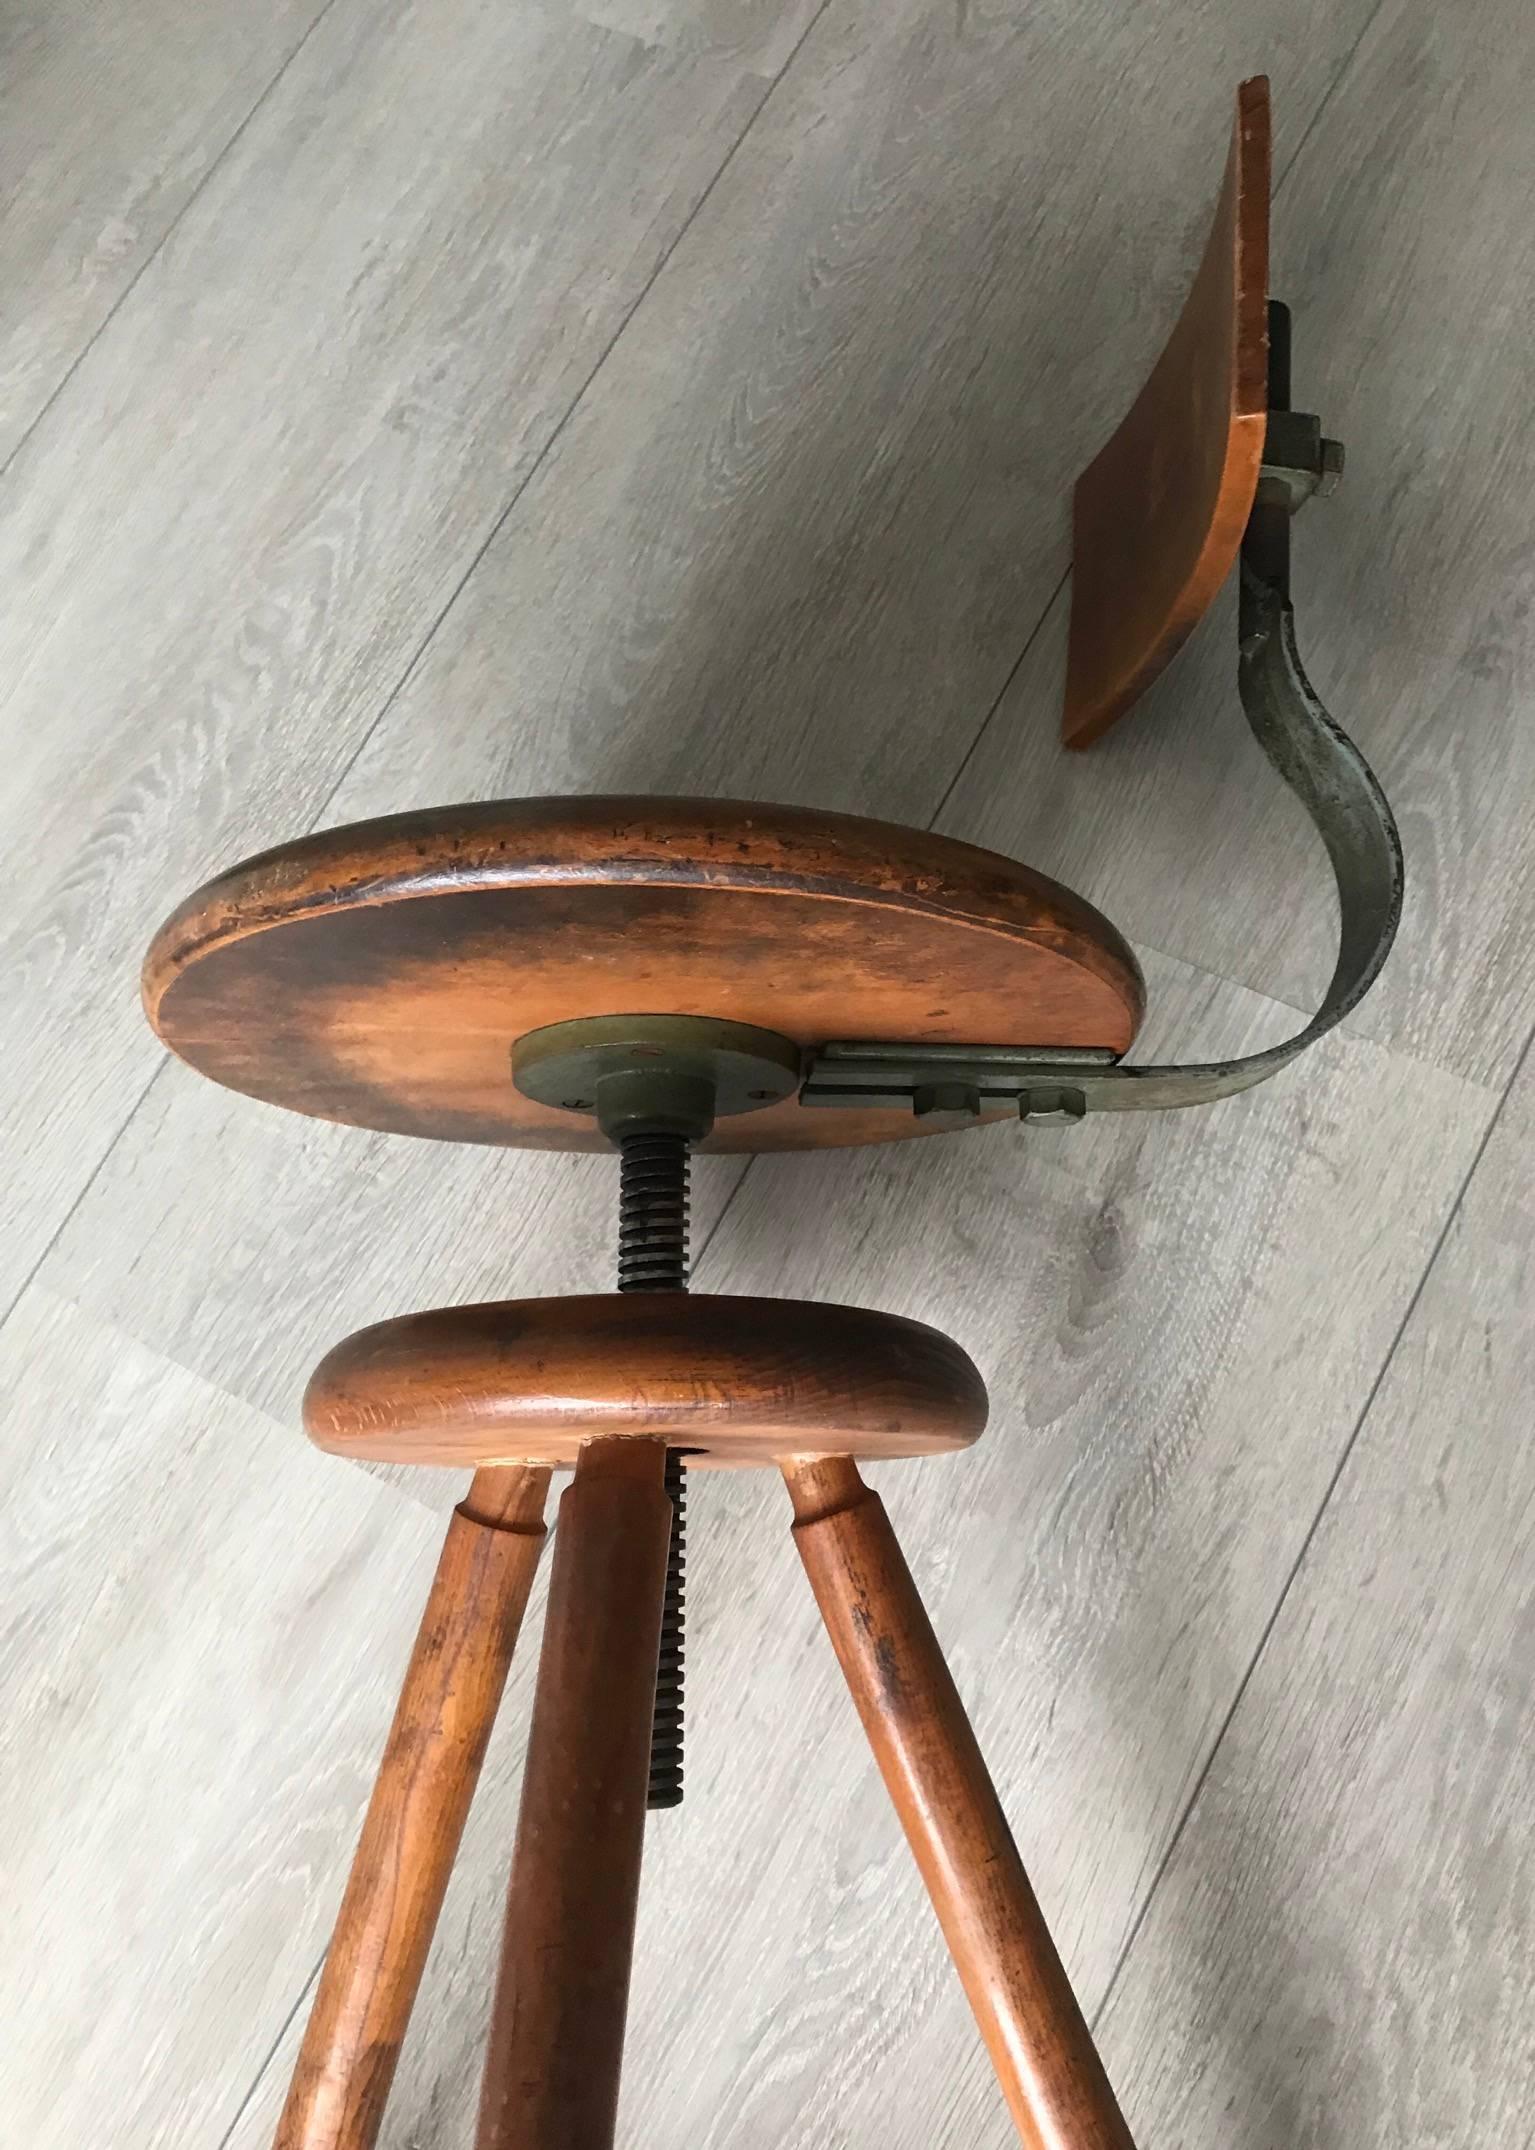 Rare Industrial Artist Studio Spindle Chair or Stool Adjustable in Height, 1920s 8